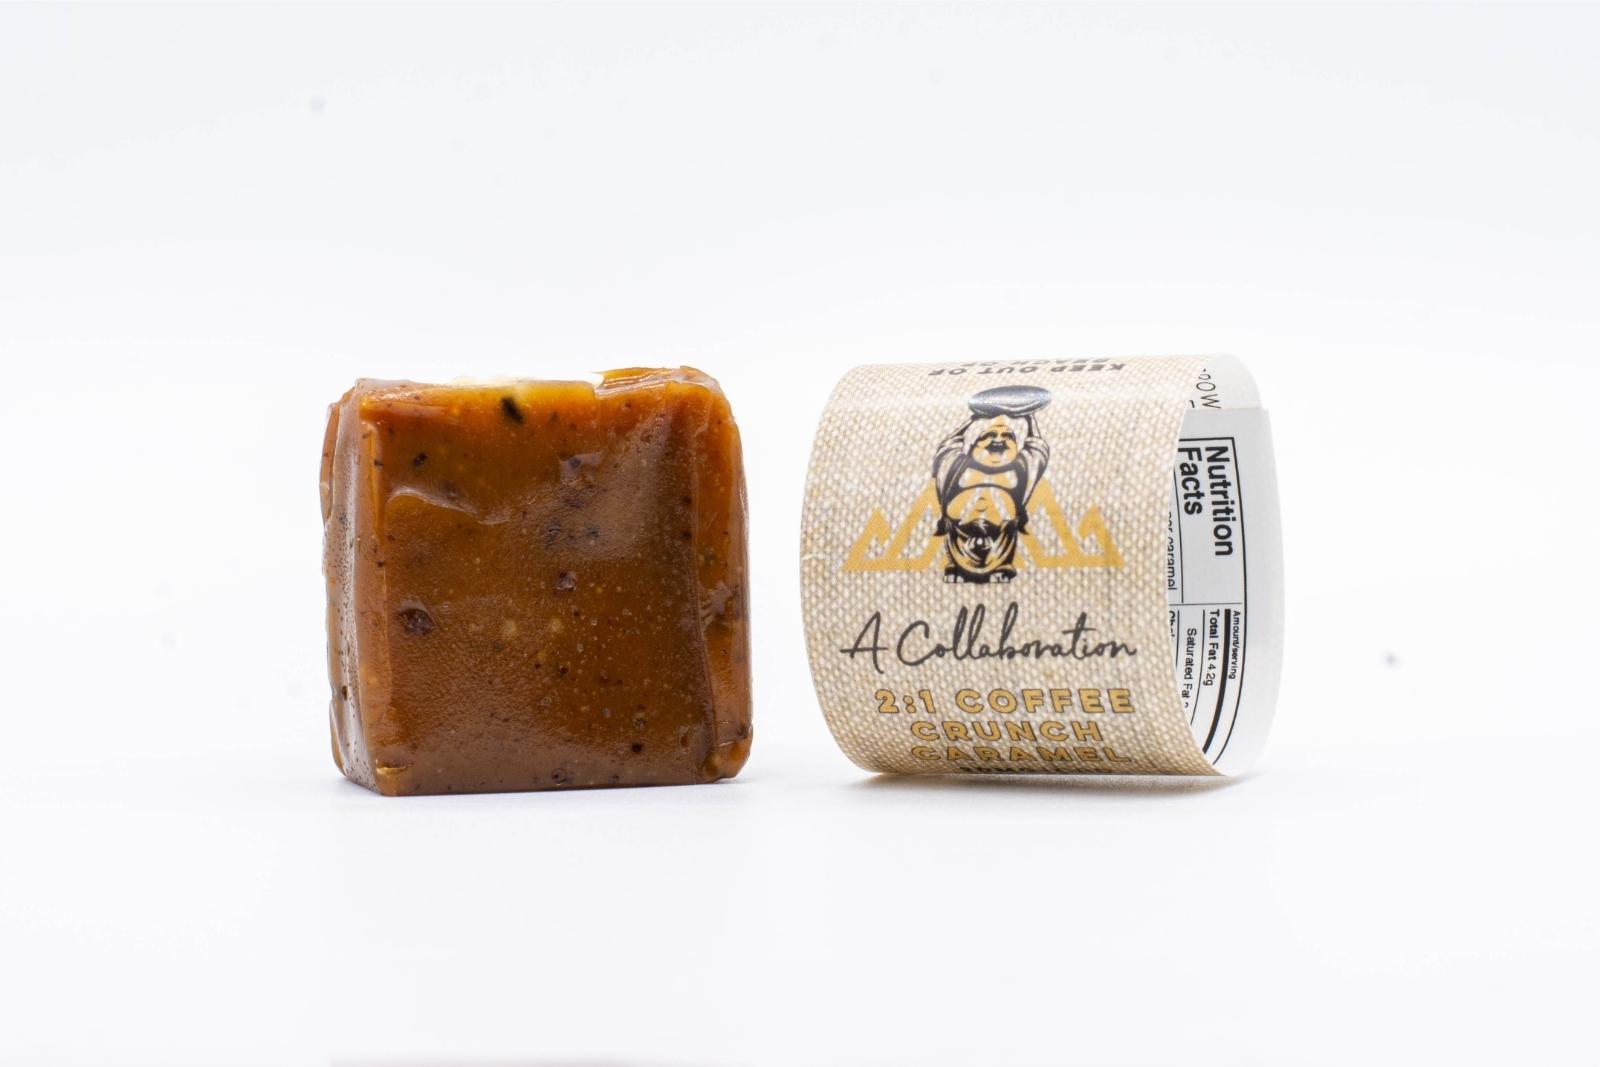 An unwrapped 2:1 Coffee Crunch Caramel by Seventh Hill CBD, next to its sleeve, on a white background